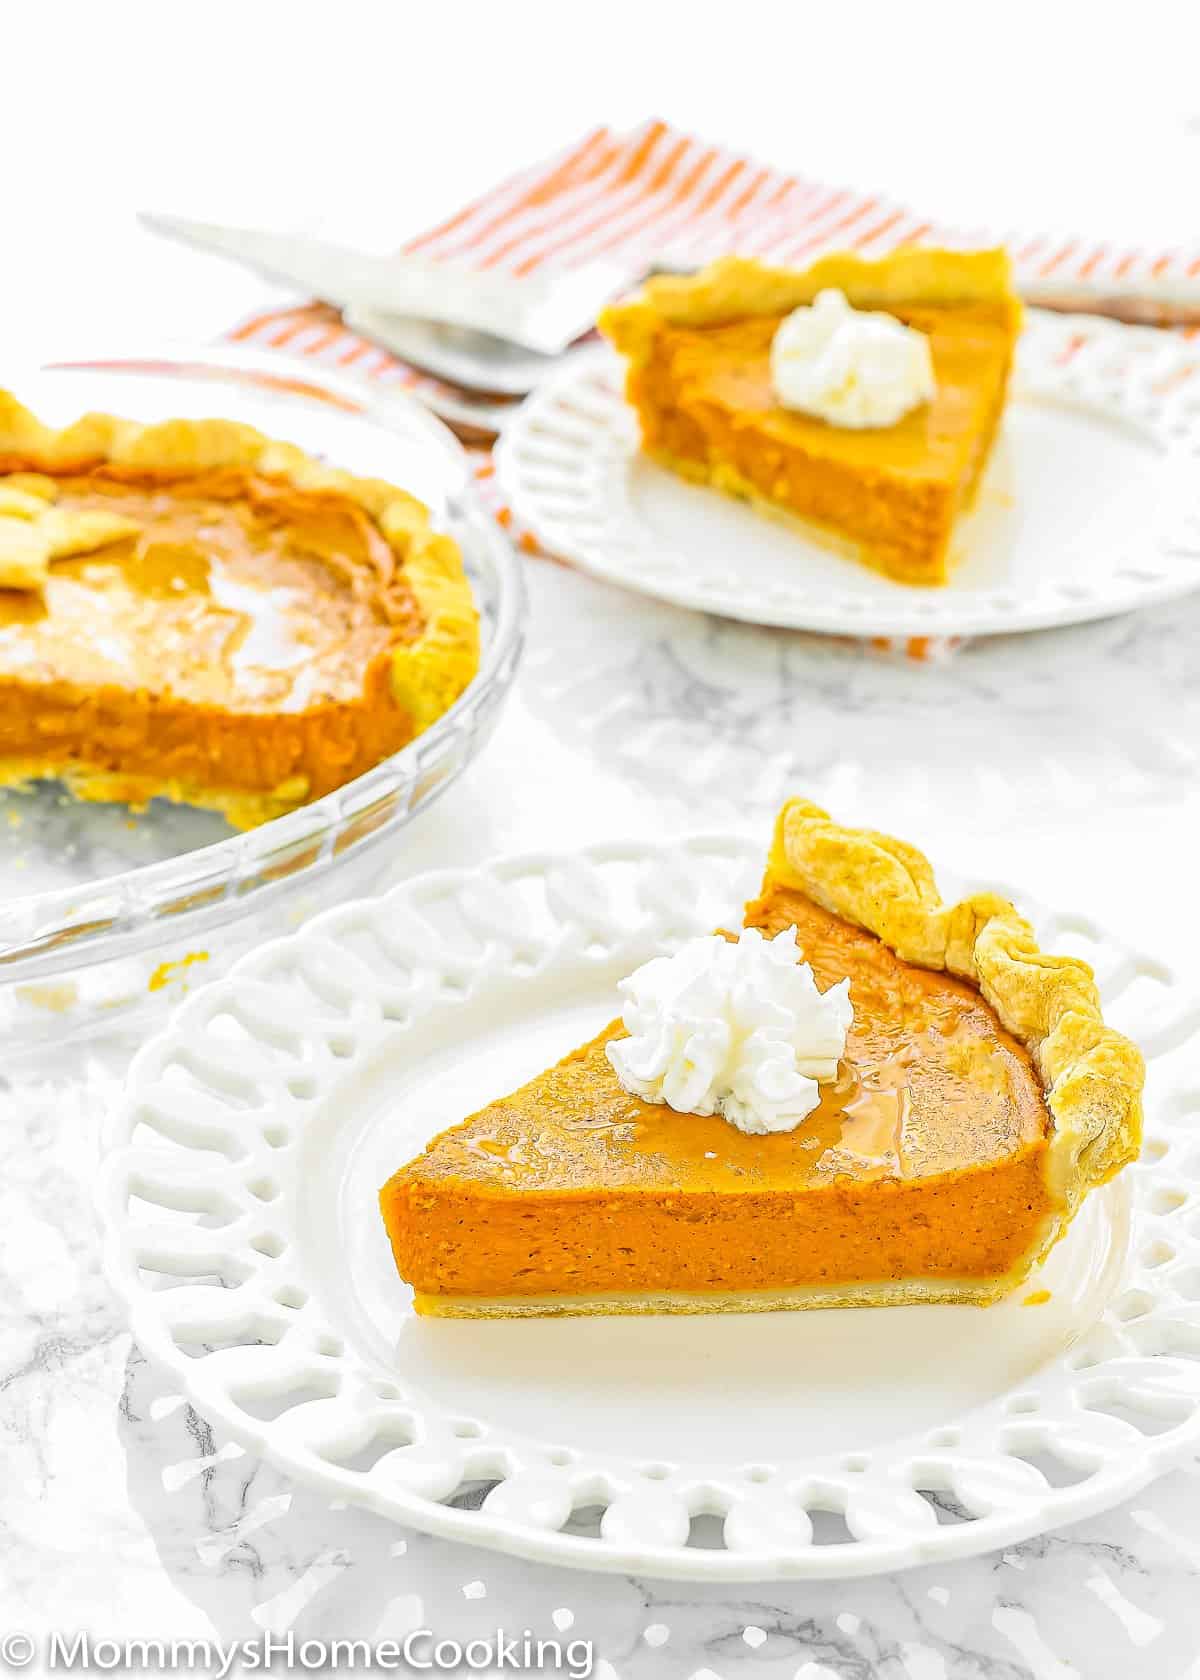 two Eggless Pumpkin Pie slices on white plates over a marble surface.